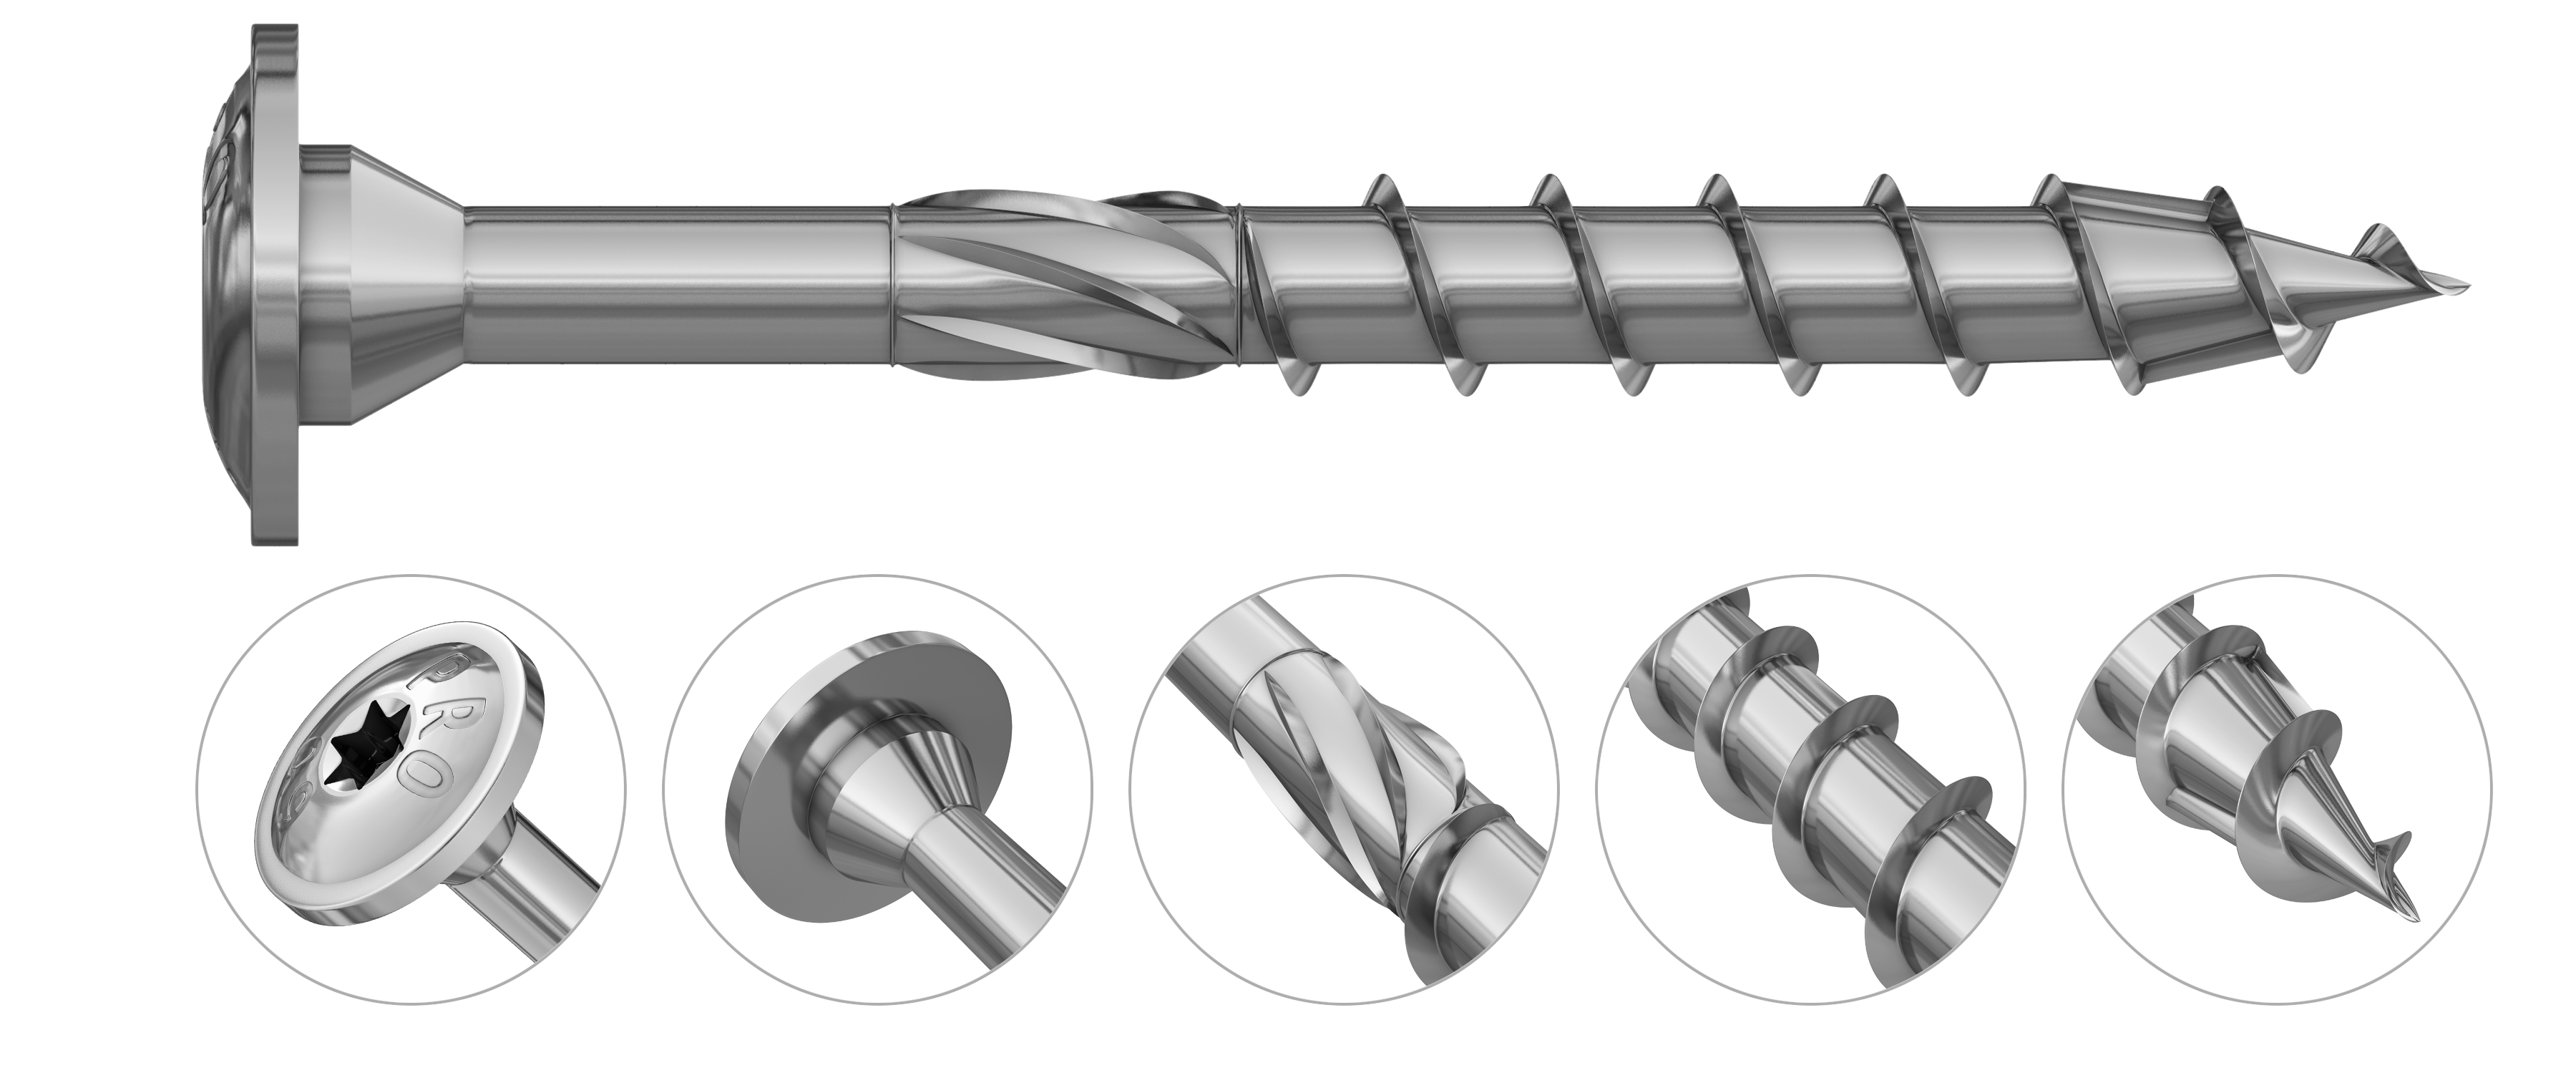 R-PTK Construction screw with wafer head and partial thread